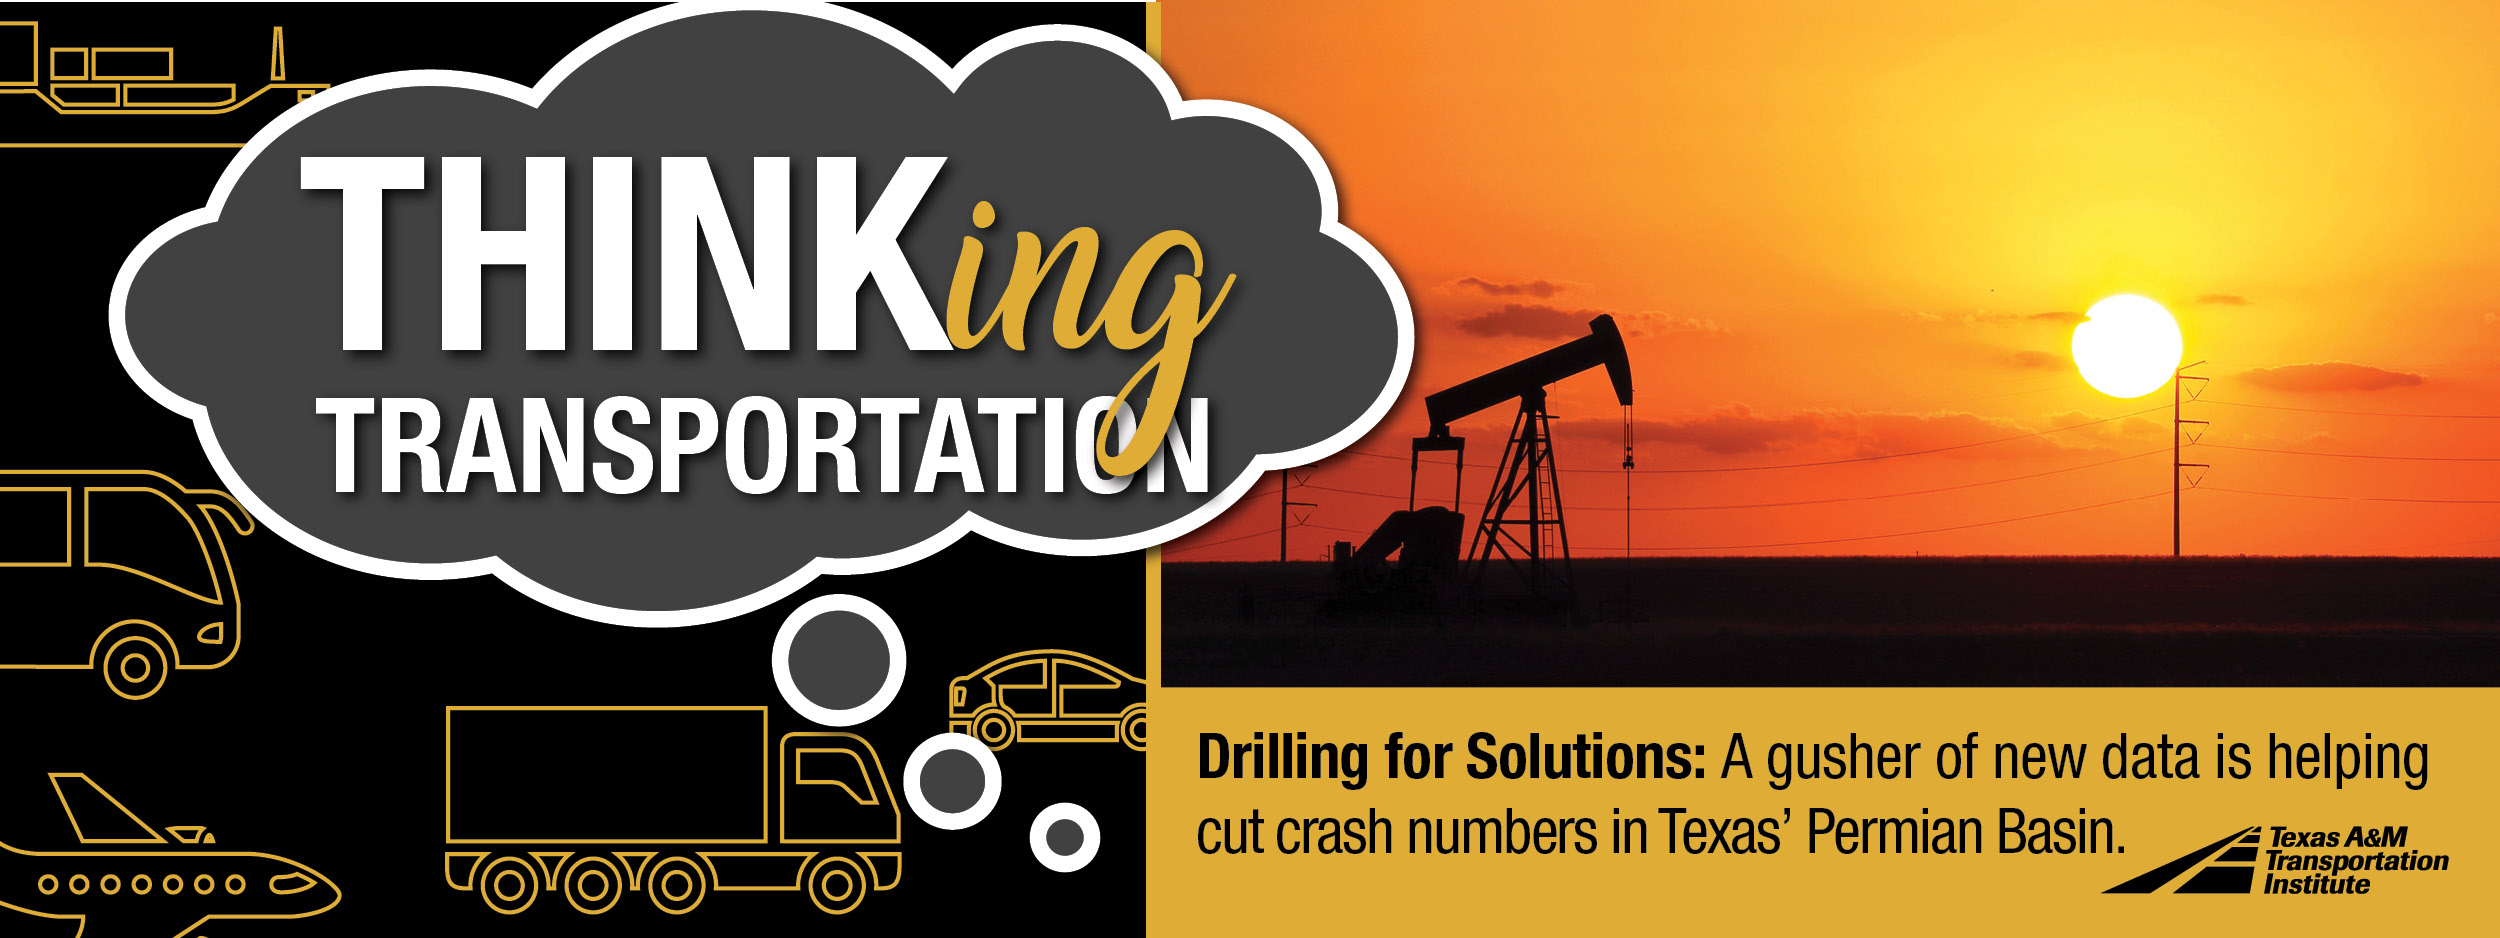 Thinking Transportation Podcast. Drilling for solutions: A gusher of new data is helping cut crash numbers in Texas' Permian Basin.